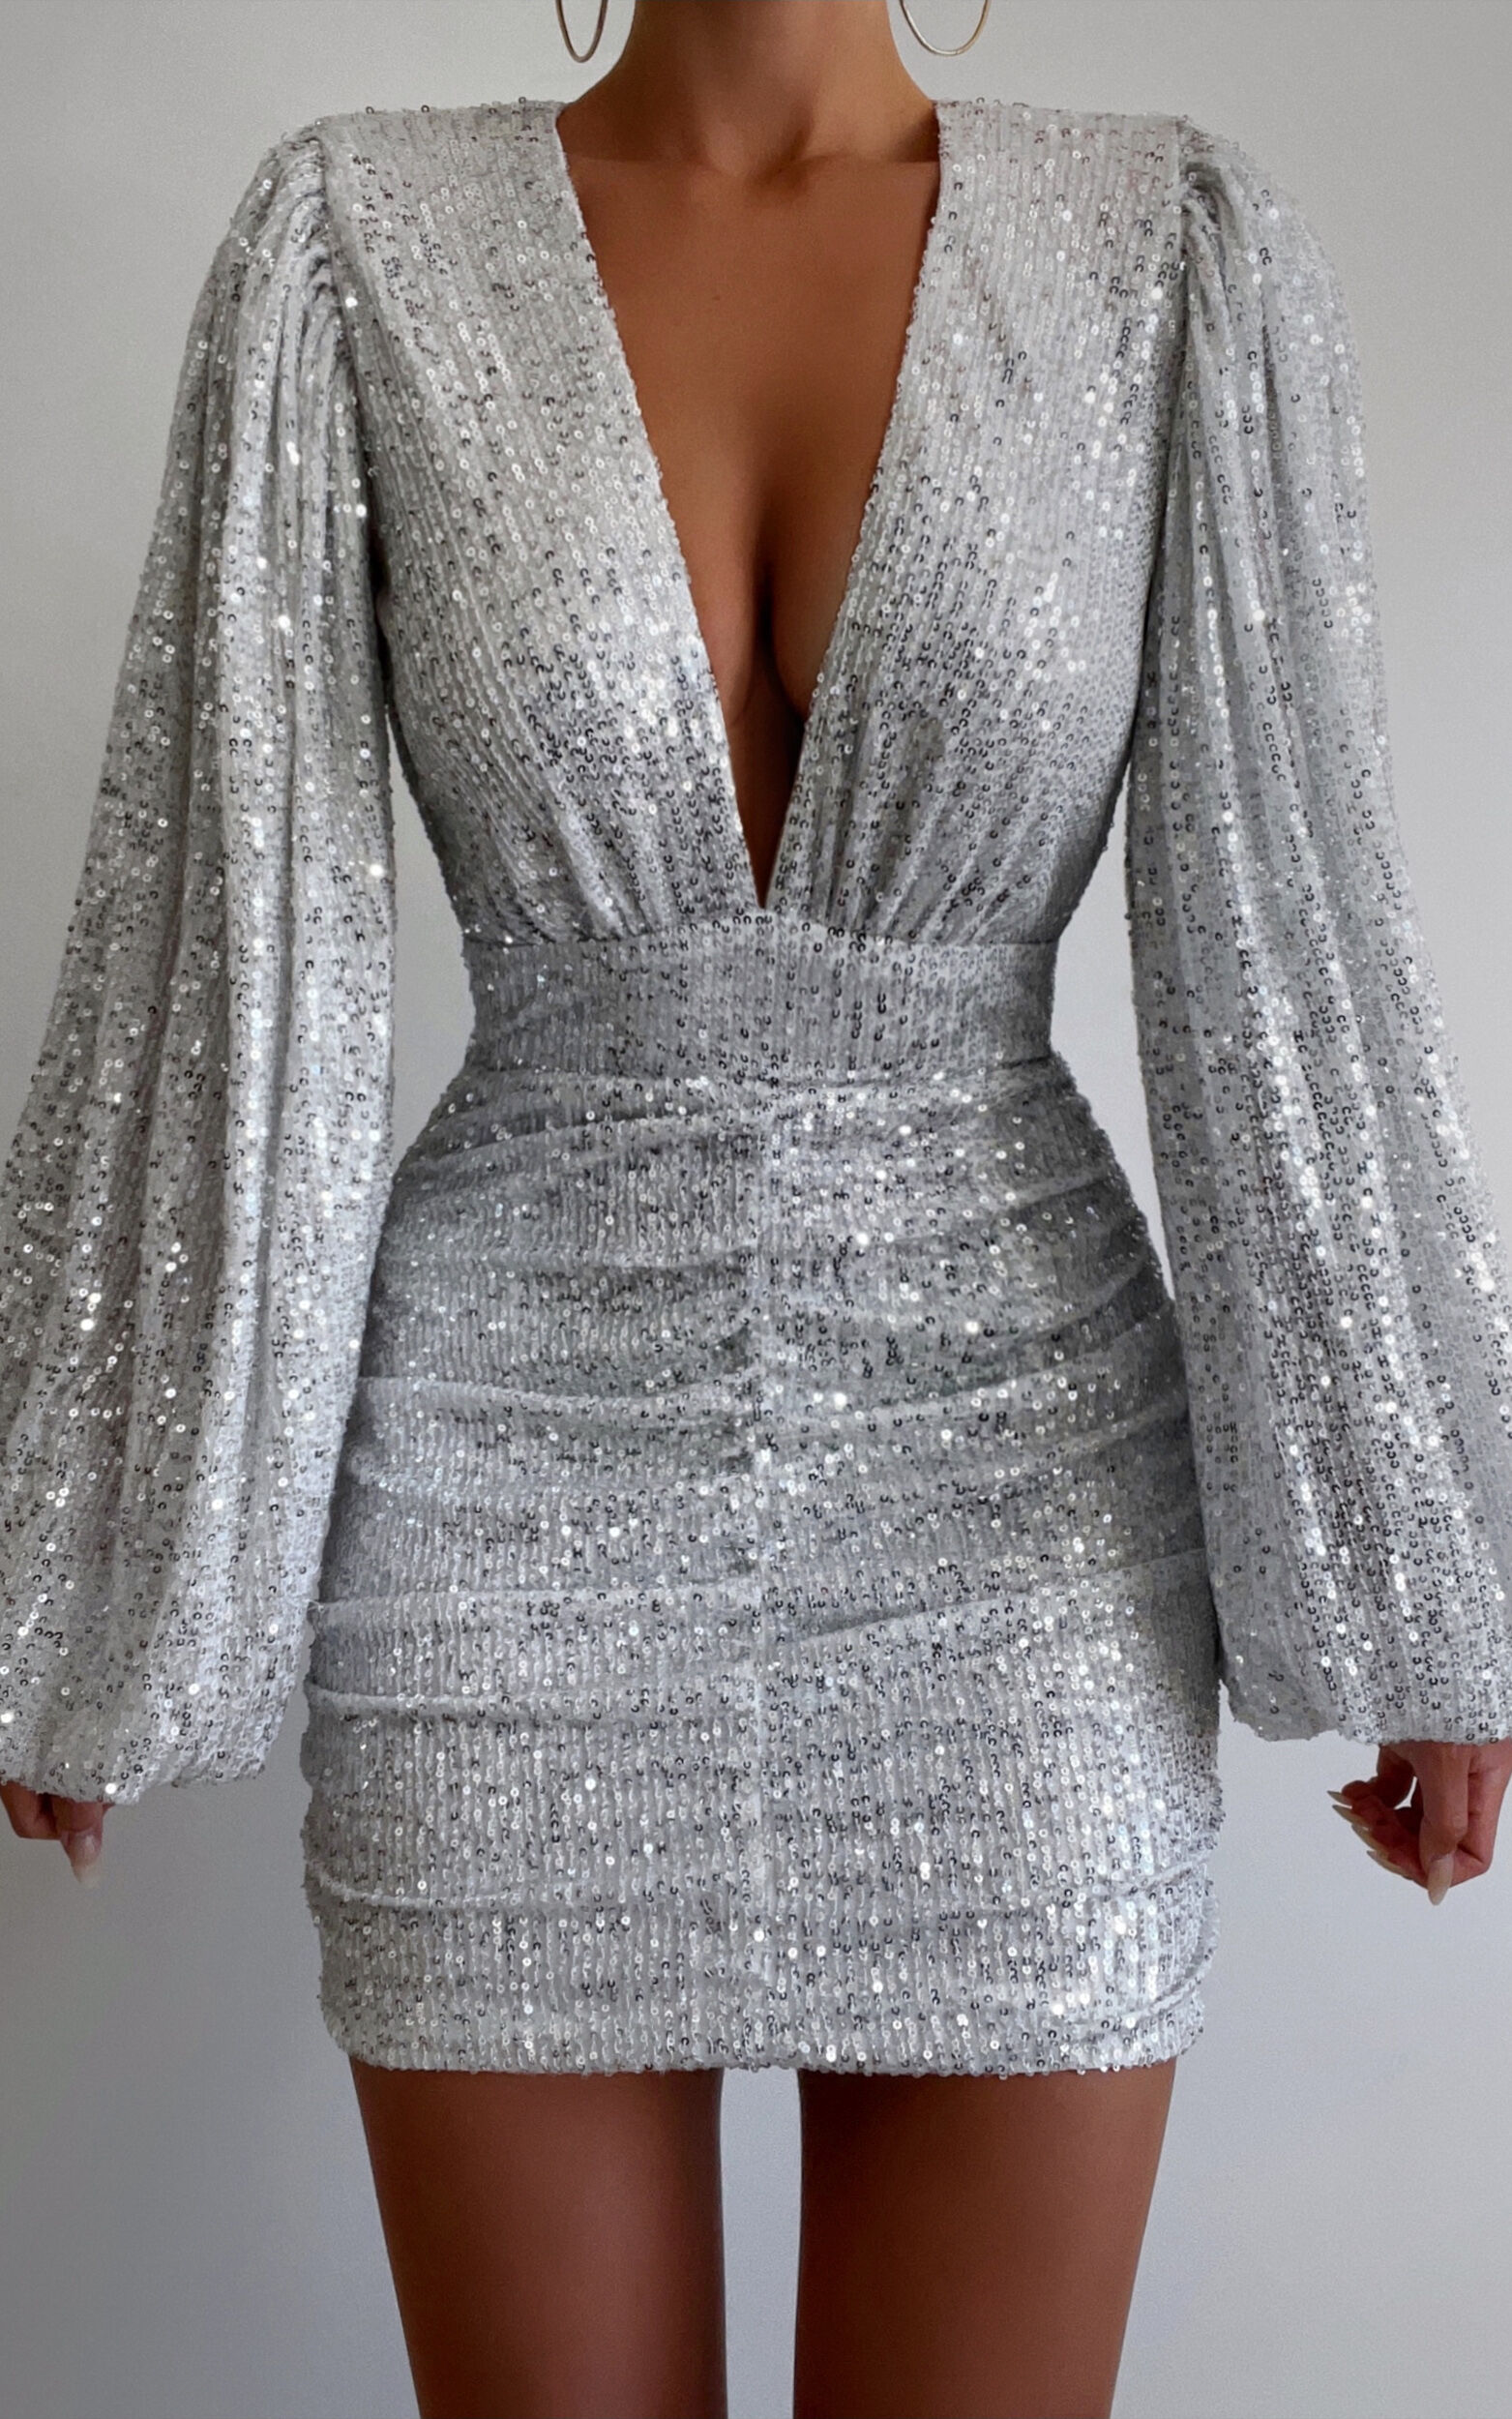 sparkly silver dress